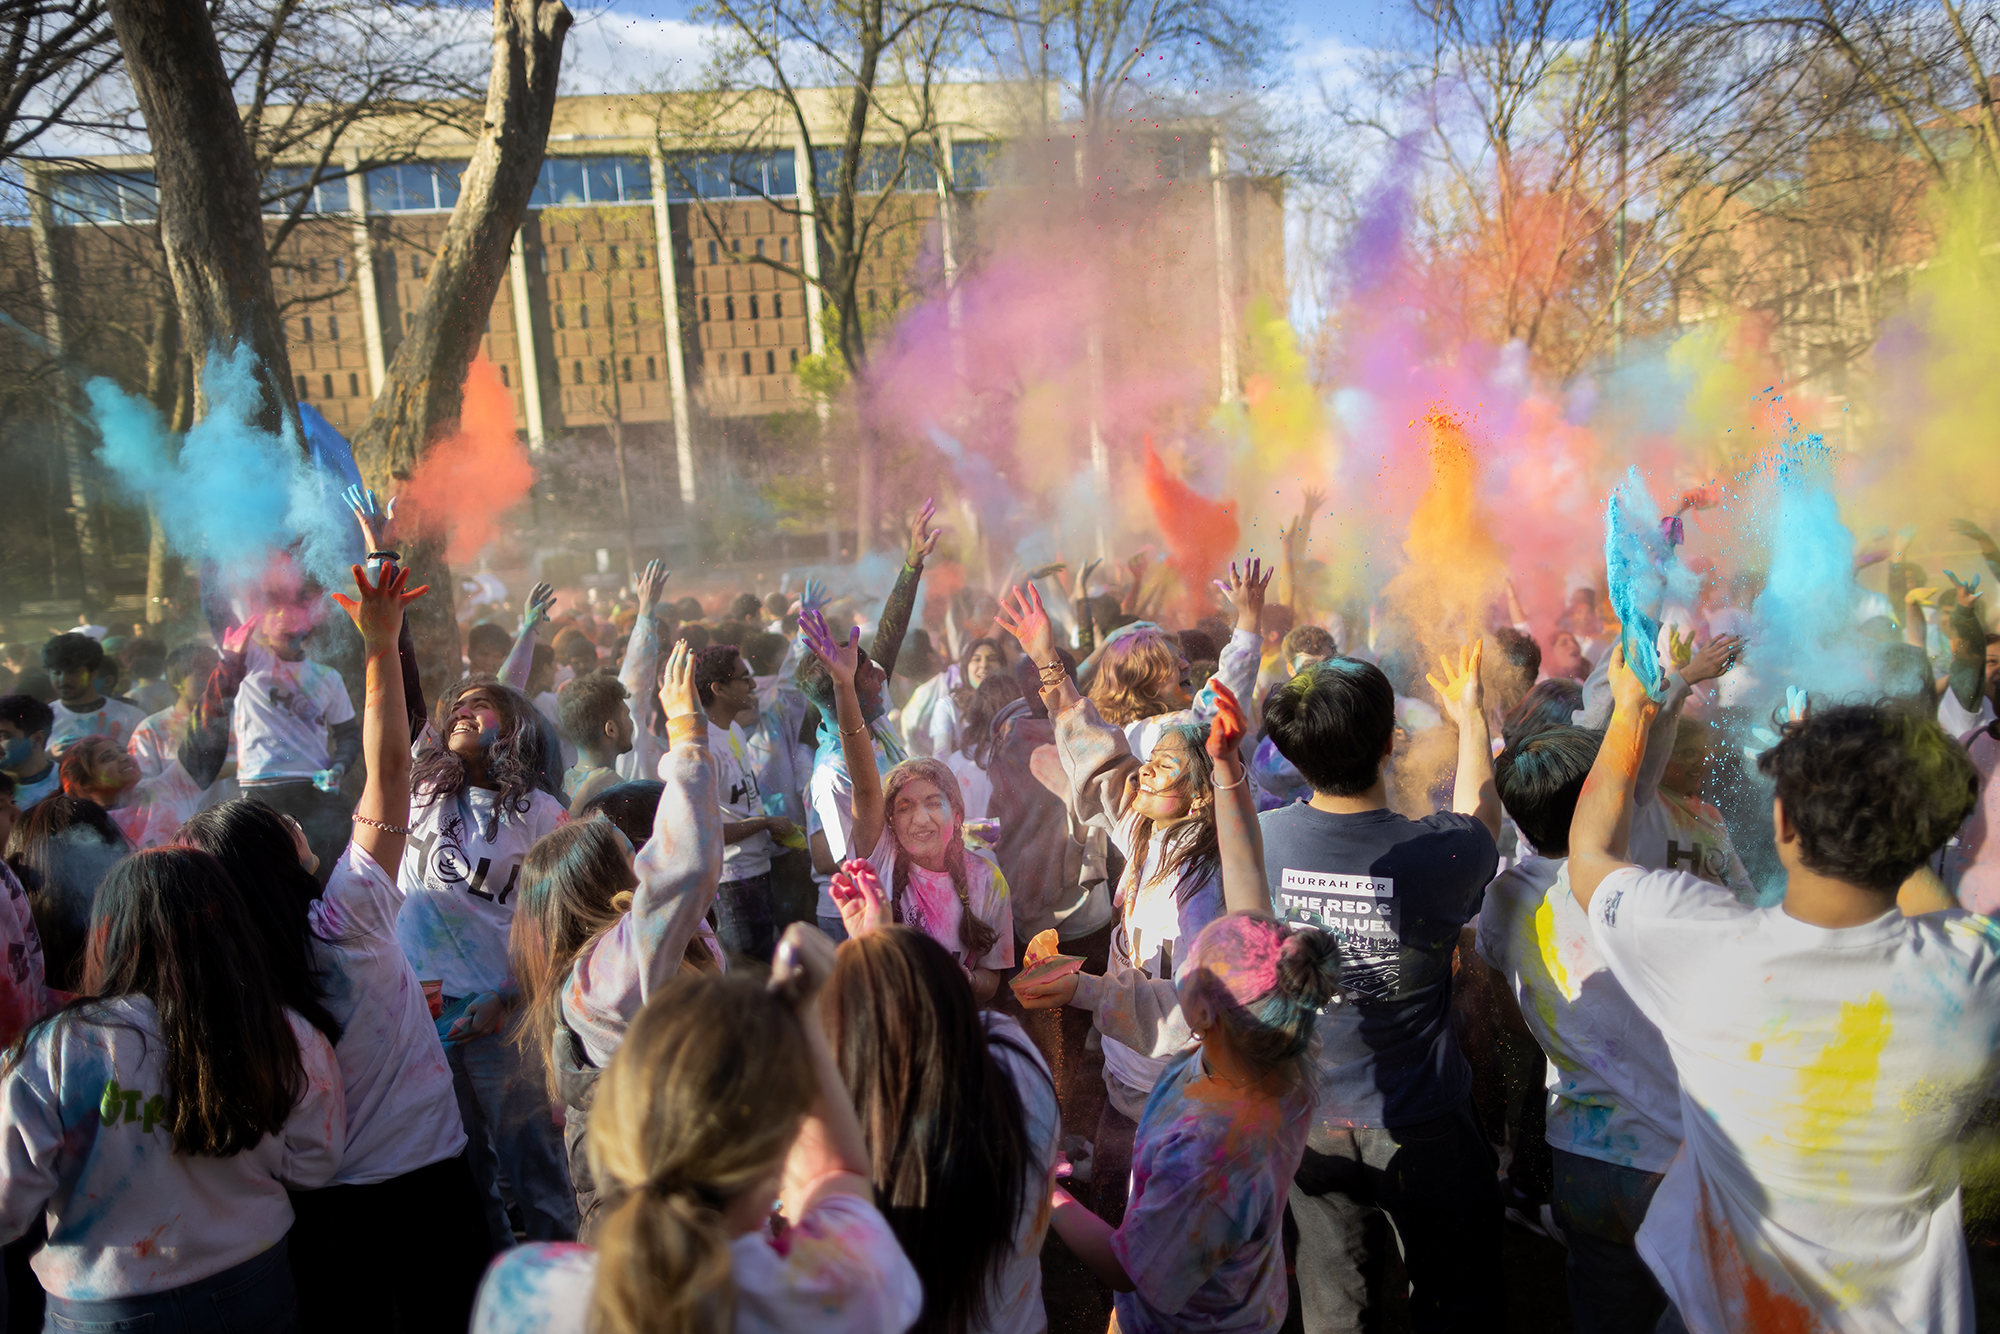 Penn students throw colored powder in the air on College Green while celebrating Holi.